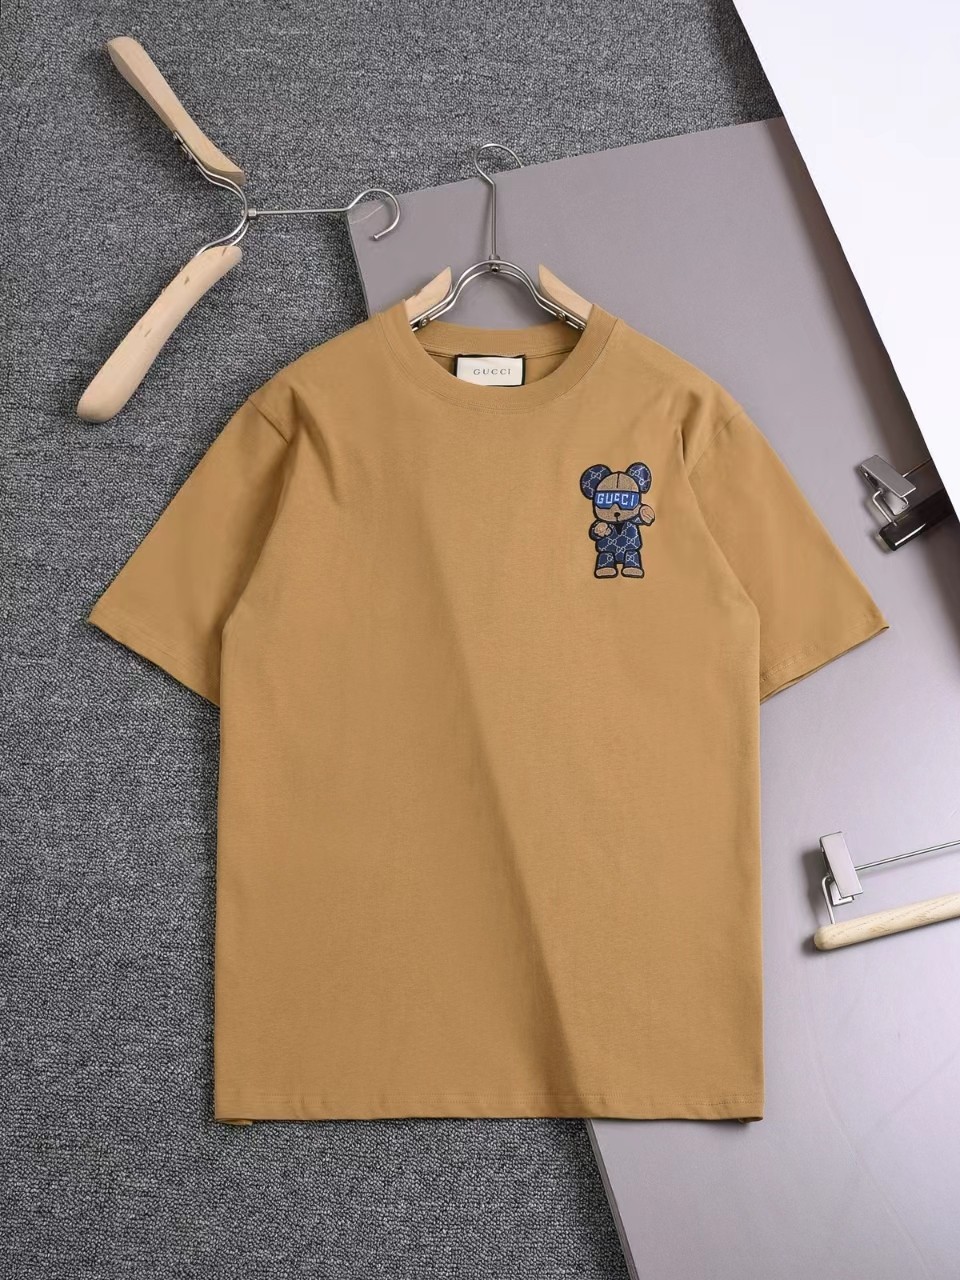 Gucci Cheap
 Clothing T-Shirt Apricot Color Beige Black Blue Khaki White Embroidery Unisex Combed Cotton Spring/Summer Collection